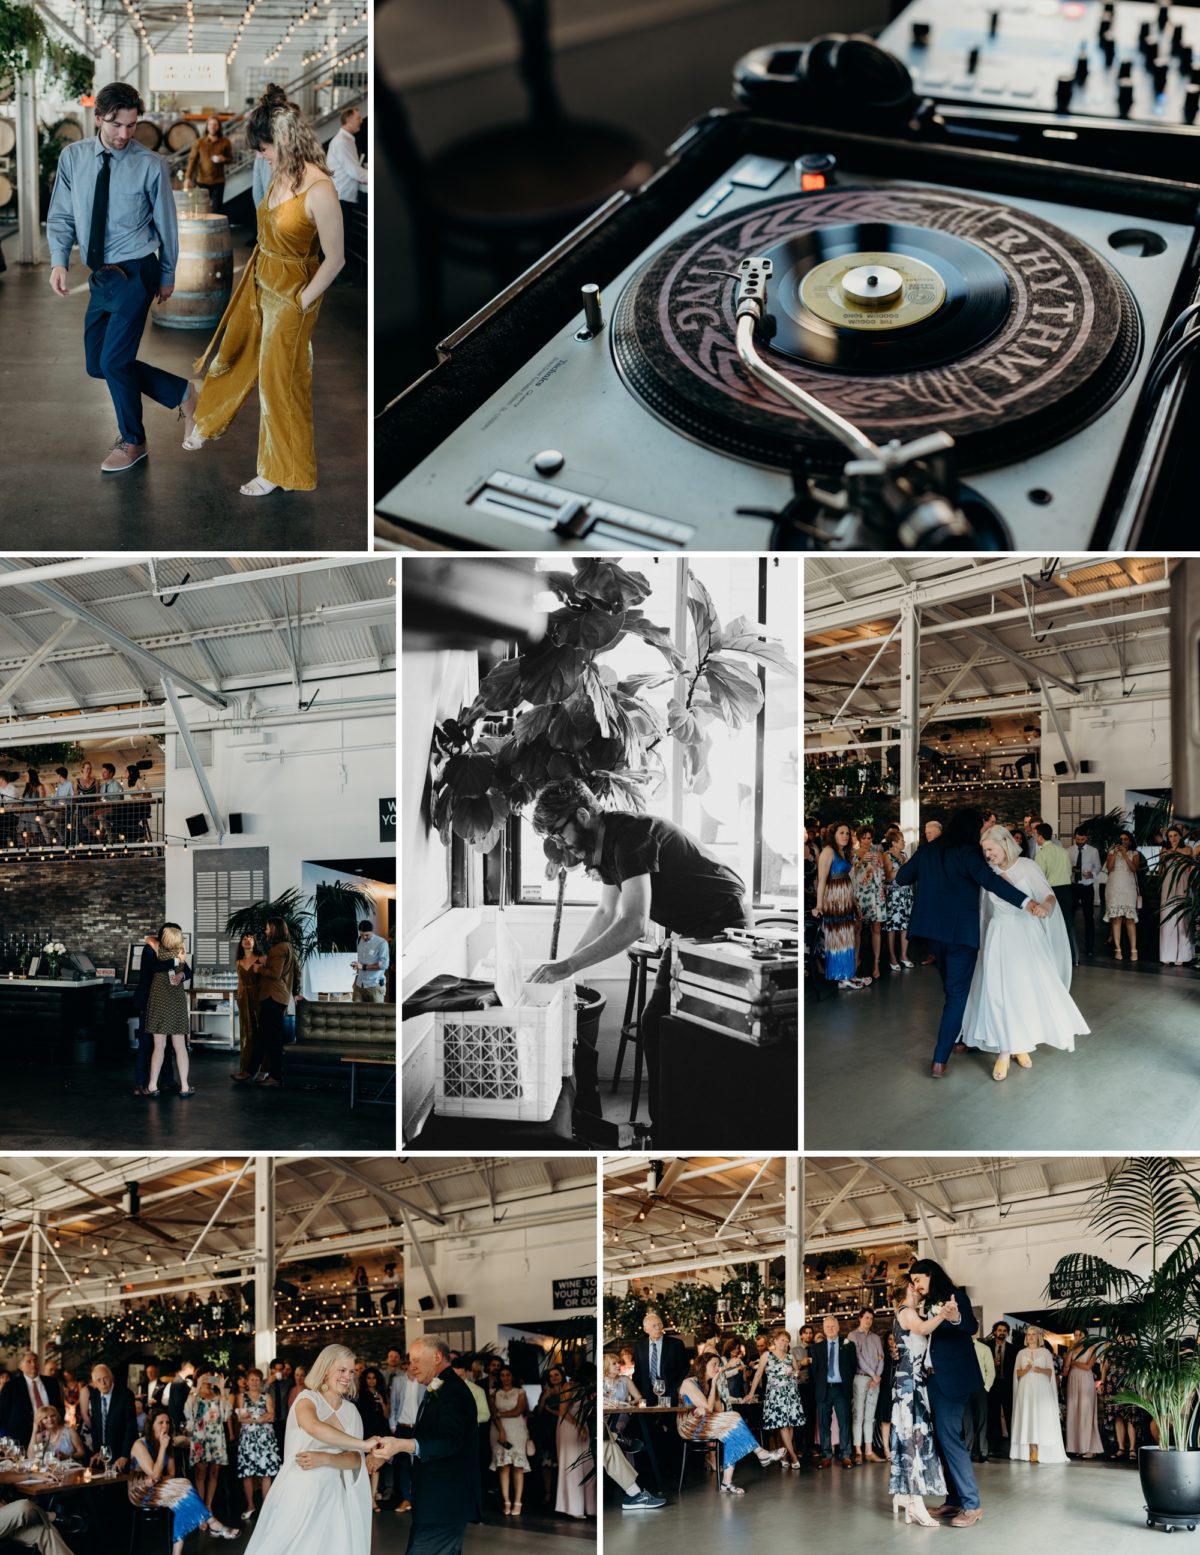 Dancing with DJ Aquaman at this Coopers Hall wedding in Portland, Oregon. Photographs by Briana Morrison Photography